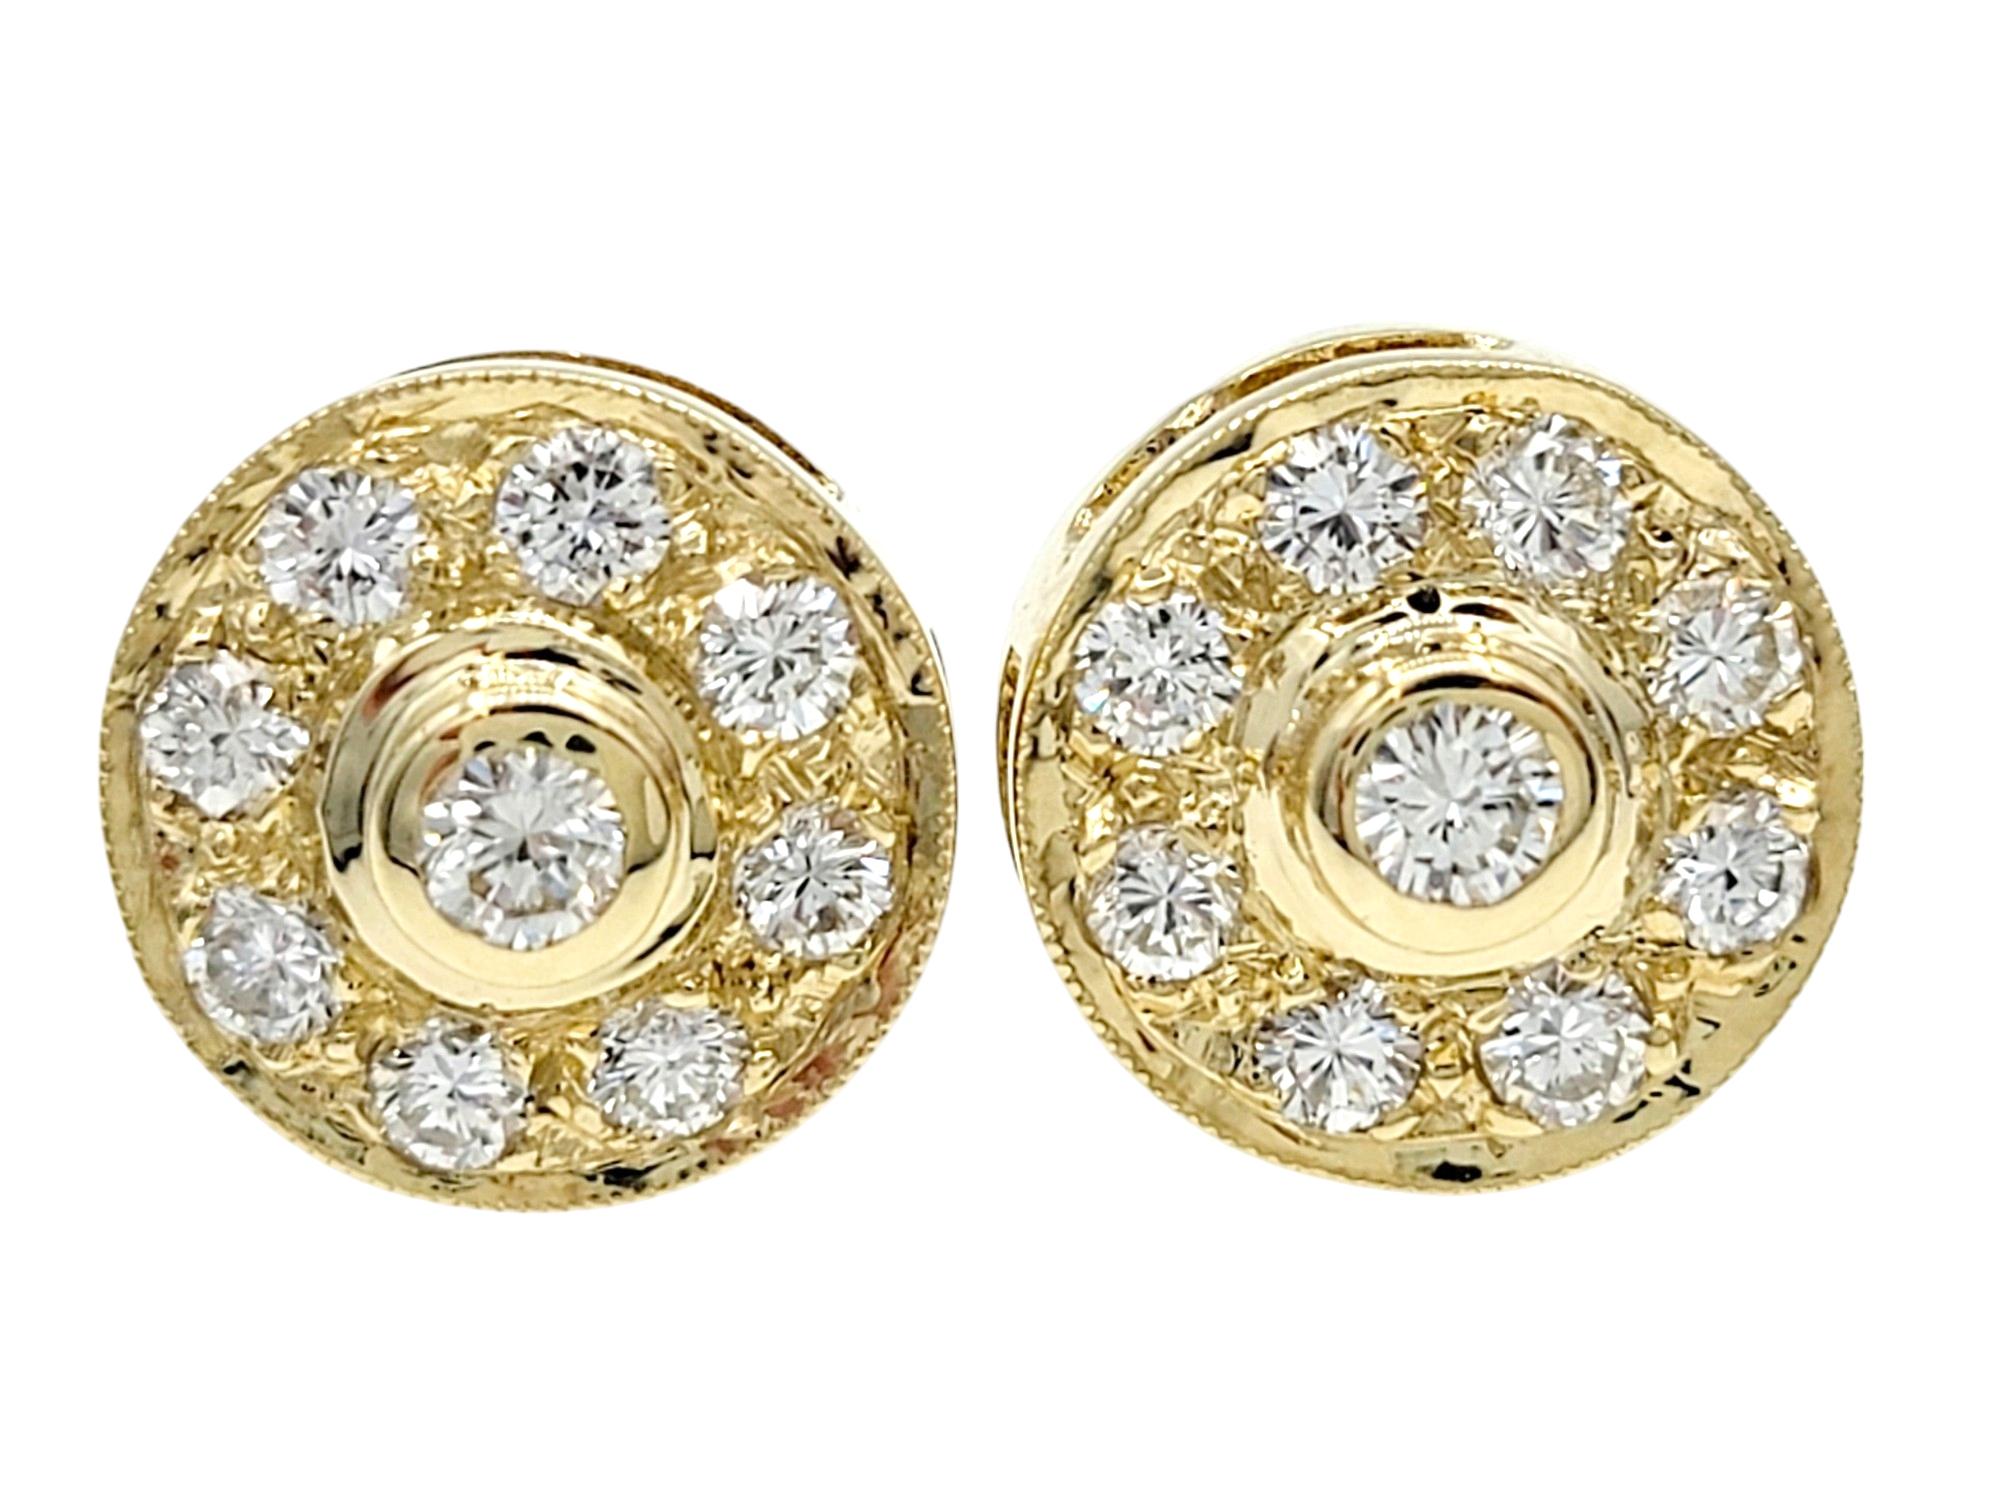 Round Diamond Halo Style Stud Earrings Set in Polished 14 Karat Yellow Gold In Good Condition For Sale In Scottsdale, AZ